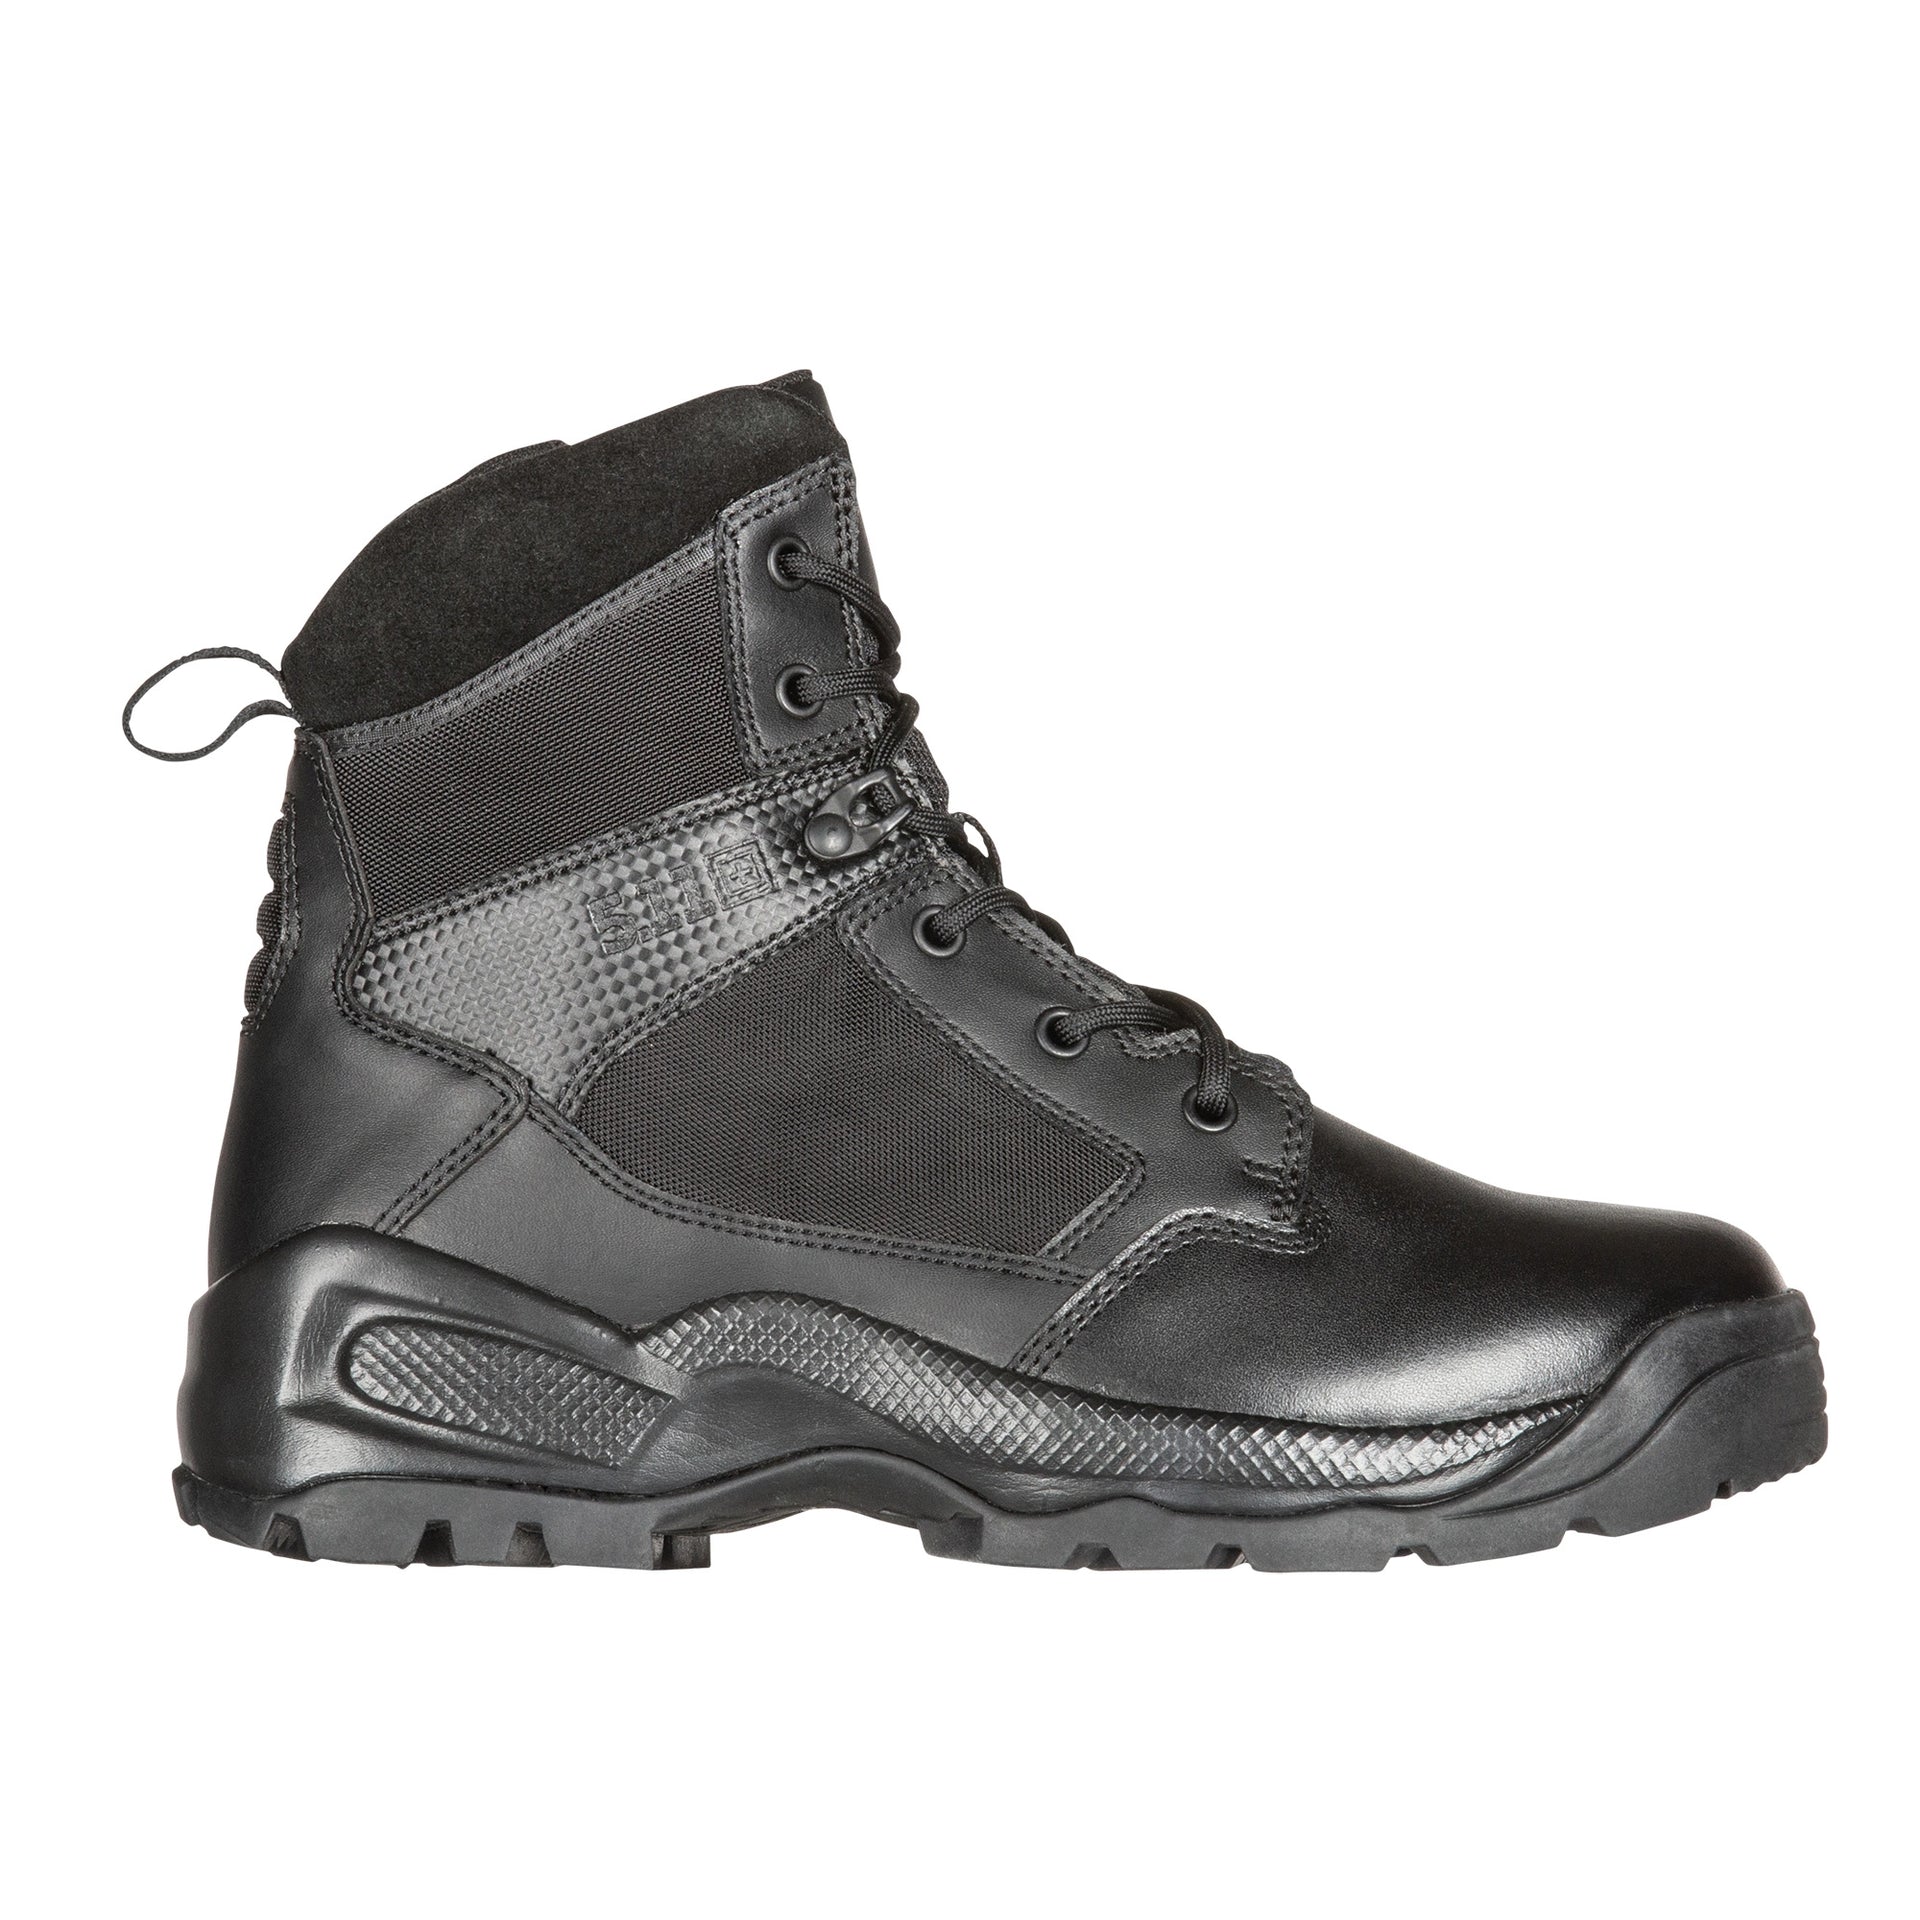 5.11 Tactical A.T.A.C.® 2.0 6" Side Zip Boot (12394) | The Fire Center | Fuego Fire Center | Firefighter Gear | The Fire Store | The boot worn by the world’s leading public safety personnel in a 6" height, the 5.11® A.T.A.C. 2.0. It’s lighter and more comfortable, yet maintains its reputation for toughness and durability. 